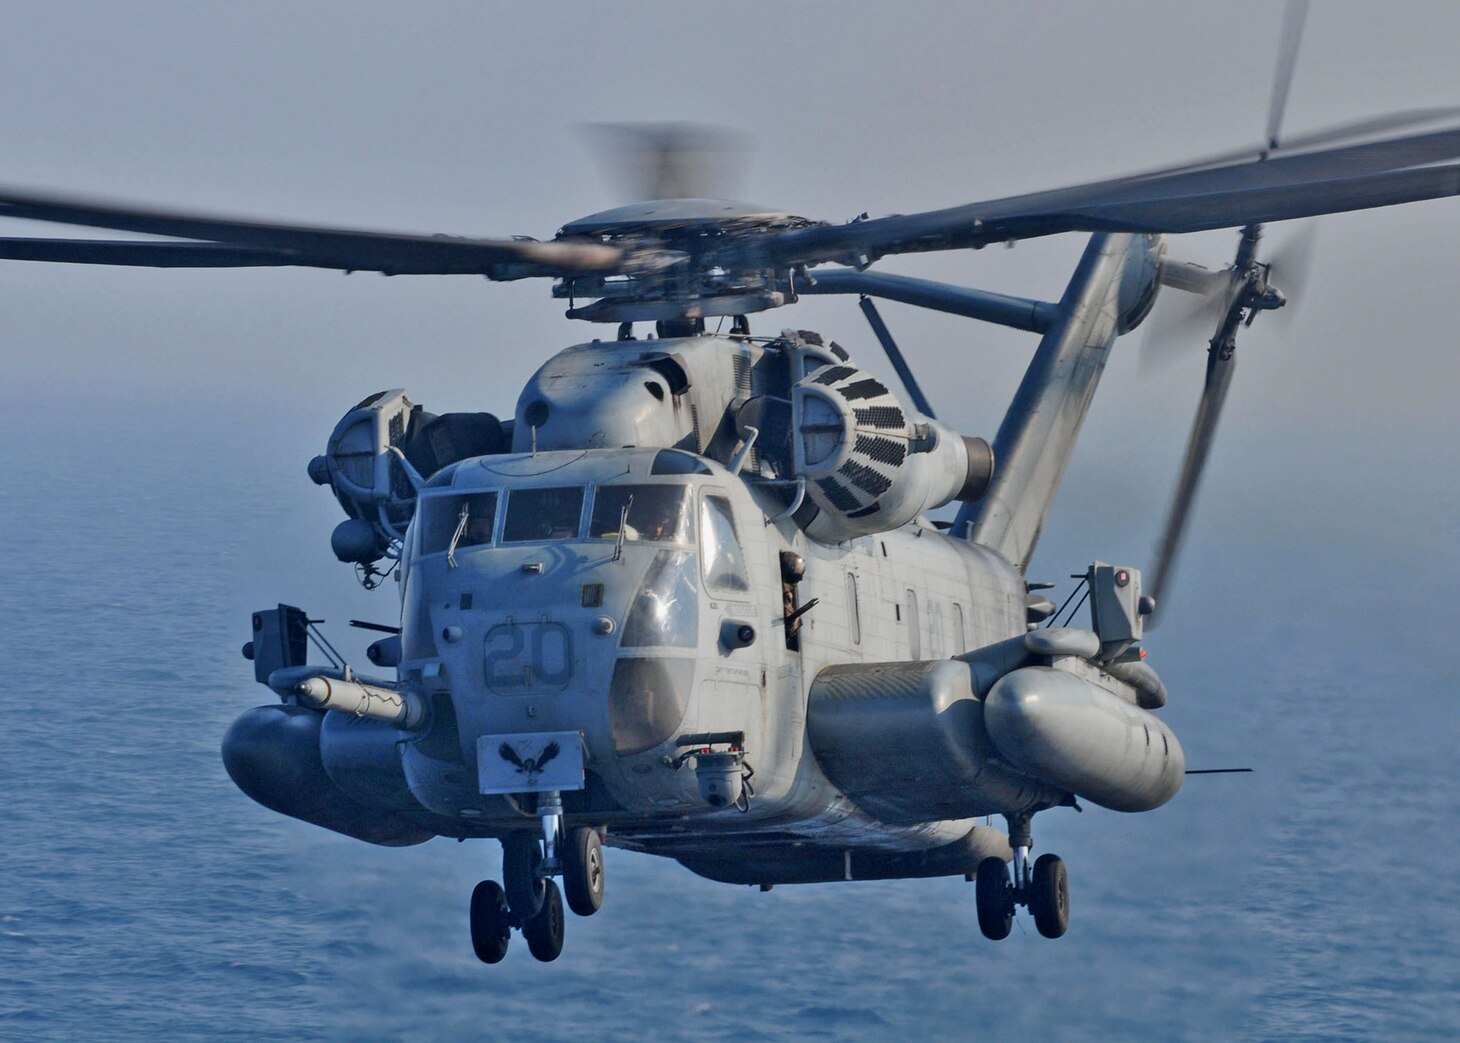 A CH-53 Super Stallion helicopter from Marine Medium Tiltrotor Squadron (VMM) 261 (REIN) takes off from the flight deck of the amphibious transport dock ship USS New York (LPD 21). New York is part of the Iwo Jima Amphibious Ready Group with the embarked 24th Marine Expeditionary Unit (24th MEU) and is deployed in support of maritime security operations and theater security cooperation efforts in the U.S. 5th Fleet area of responsibility. The U.S. Navy is constantly deployed to preserve peace, protect commerce, and deter aggression through forward presence.